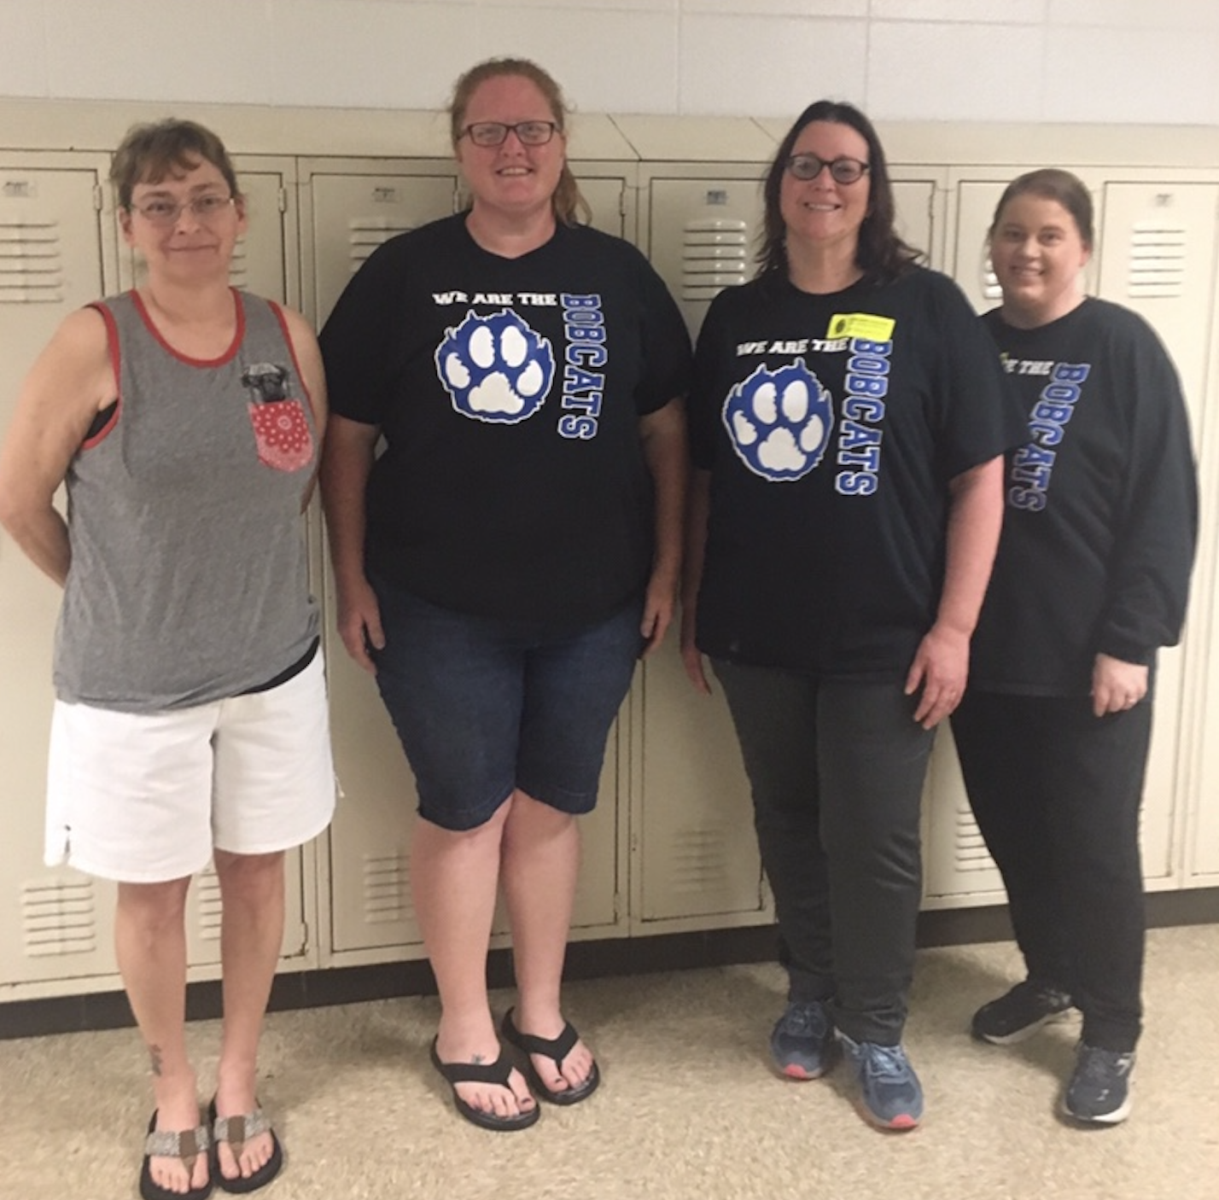 a group of women standing in front of lockers wearing shirts that say blue cats